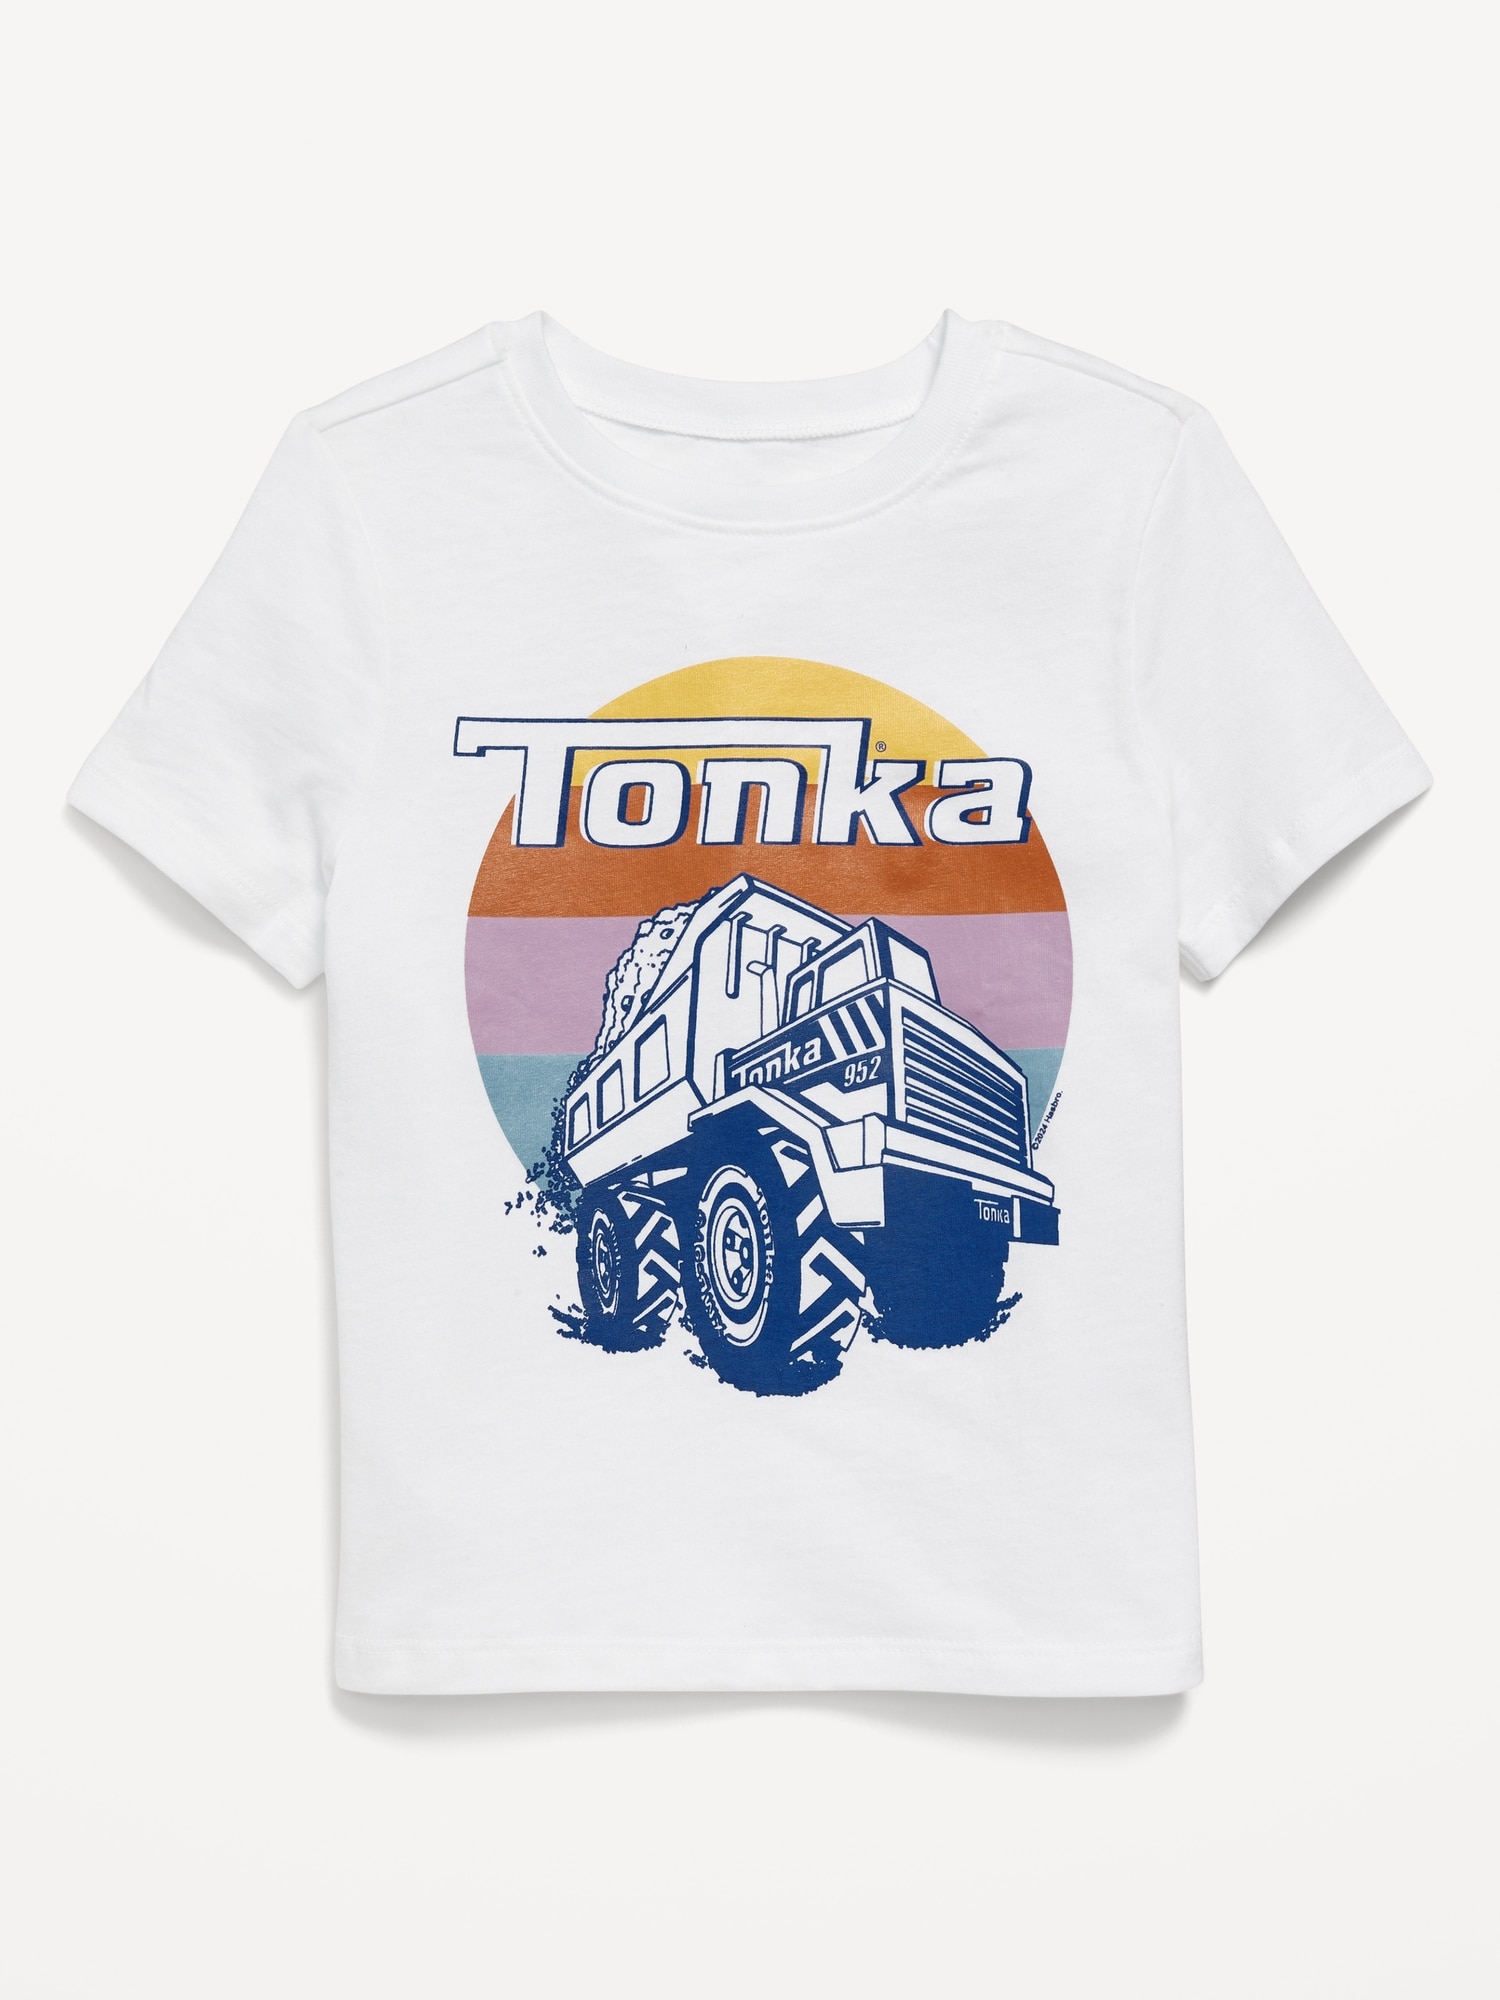 Tonka Truck Unisex Graphic T-Shirt for Toddler Hot Deal